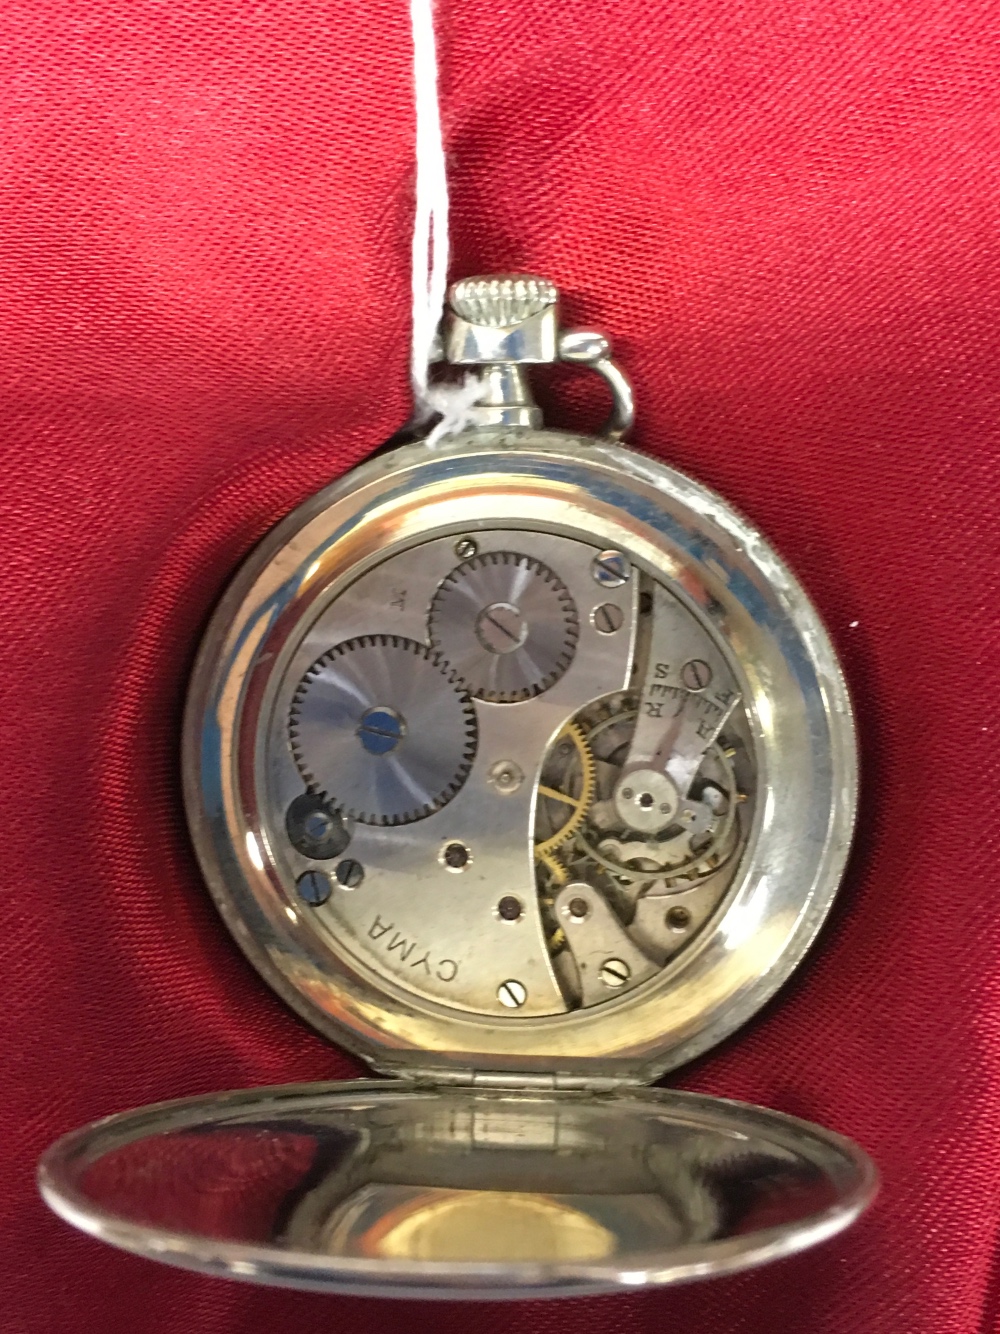 VINTAGE 'CYMA' POCKET WATCH IN POLISHED NICKEL SILVER CASE. WHITE ENAMEL DIAL. - Image 2 of 2